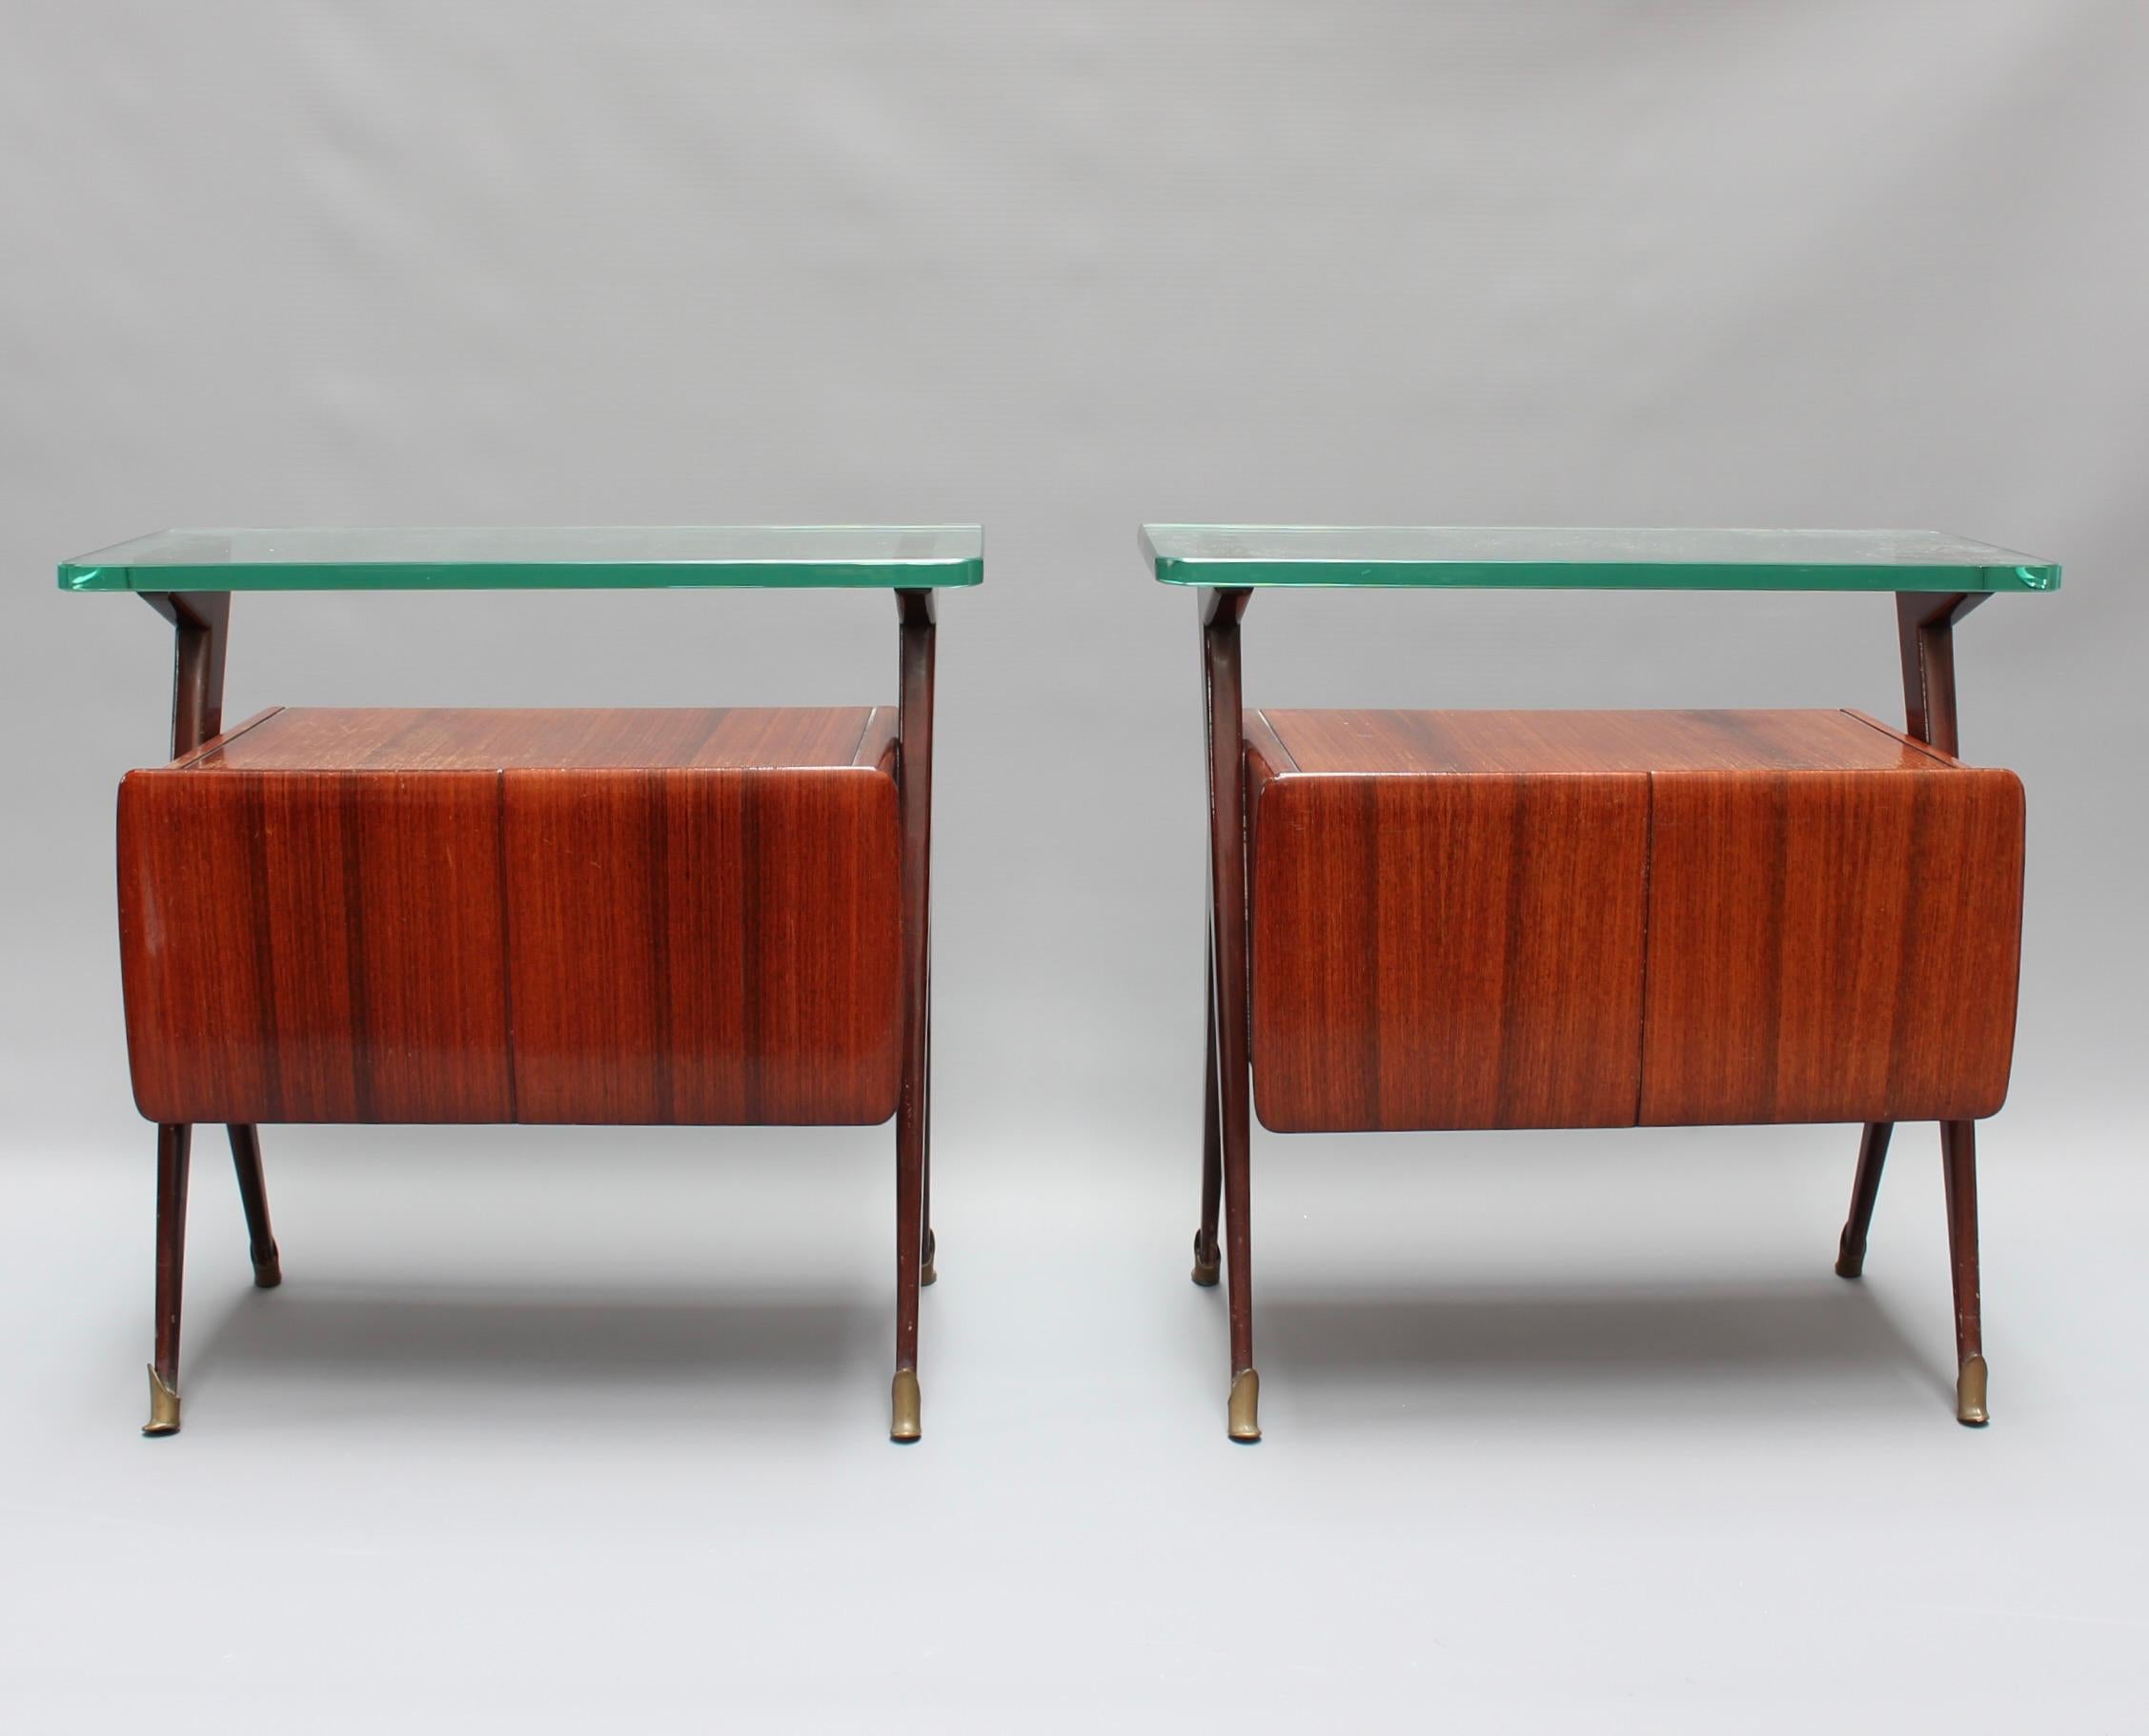 Pair of Mid-Century Italian bedside tables / night stands attributed to Silvio Cavatorta (circa 1950s). Very stylish pieces of teak veneered wood with abundant character. There are two horizontal surfaces for storage or display with the top made of